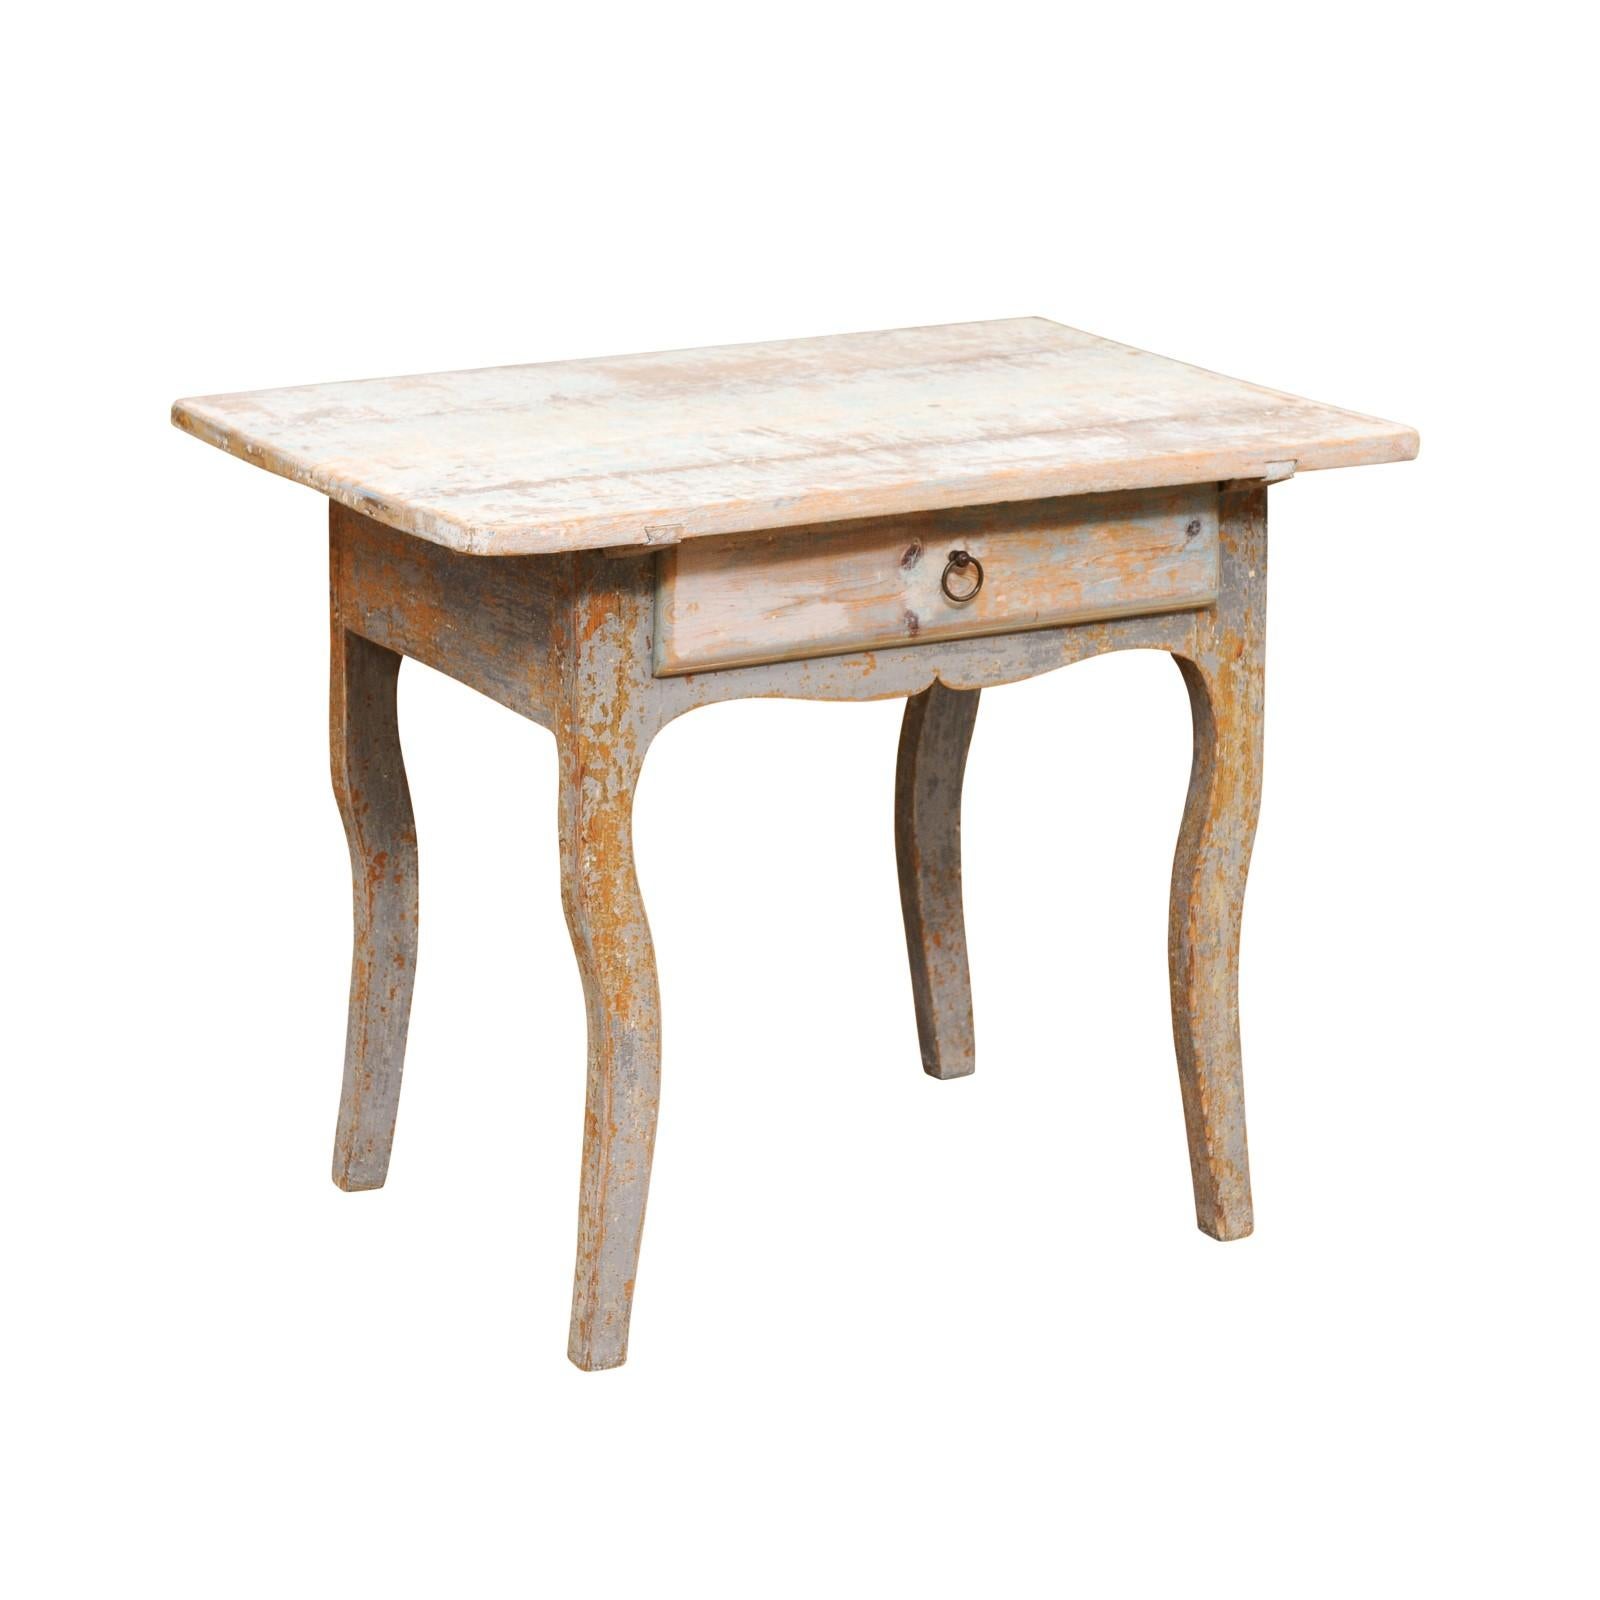 A Swedish Folk Art side table from the late 18th century, with Rococo style legs and distressed patina. Created in Sweden during the last decade of the 18th century, this wooden side table features a rectangular top sitting above a simple apron with